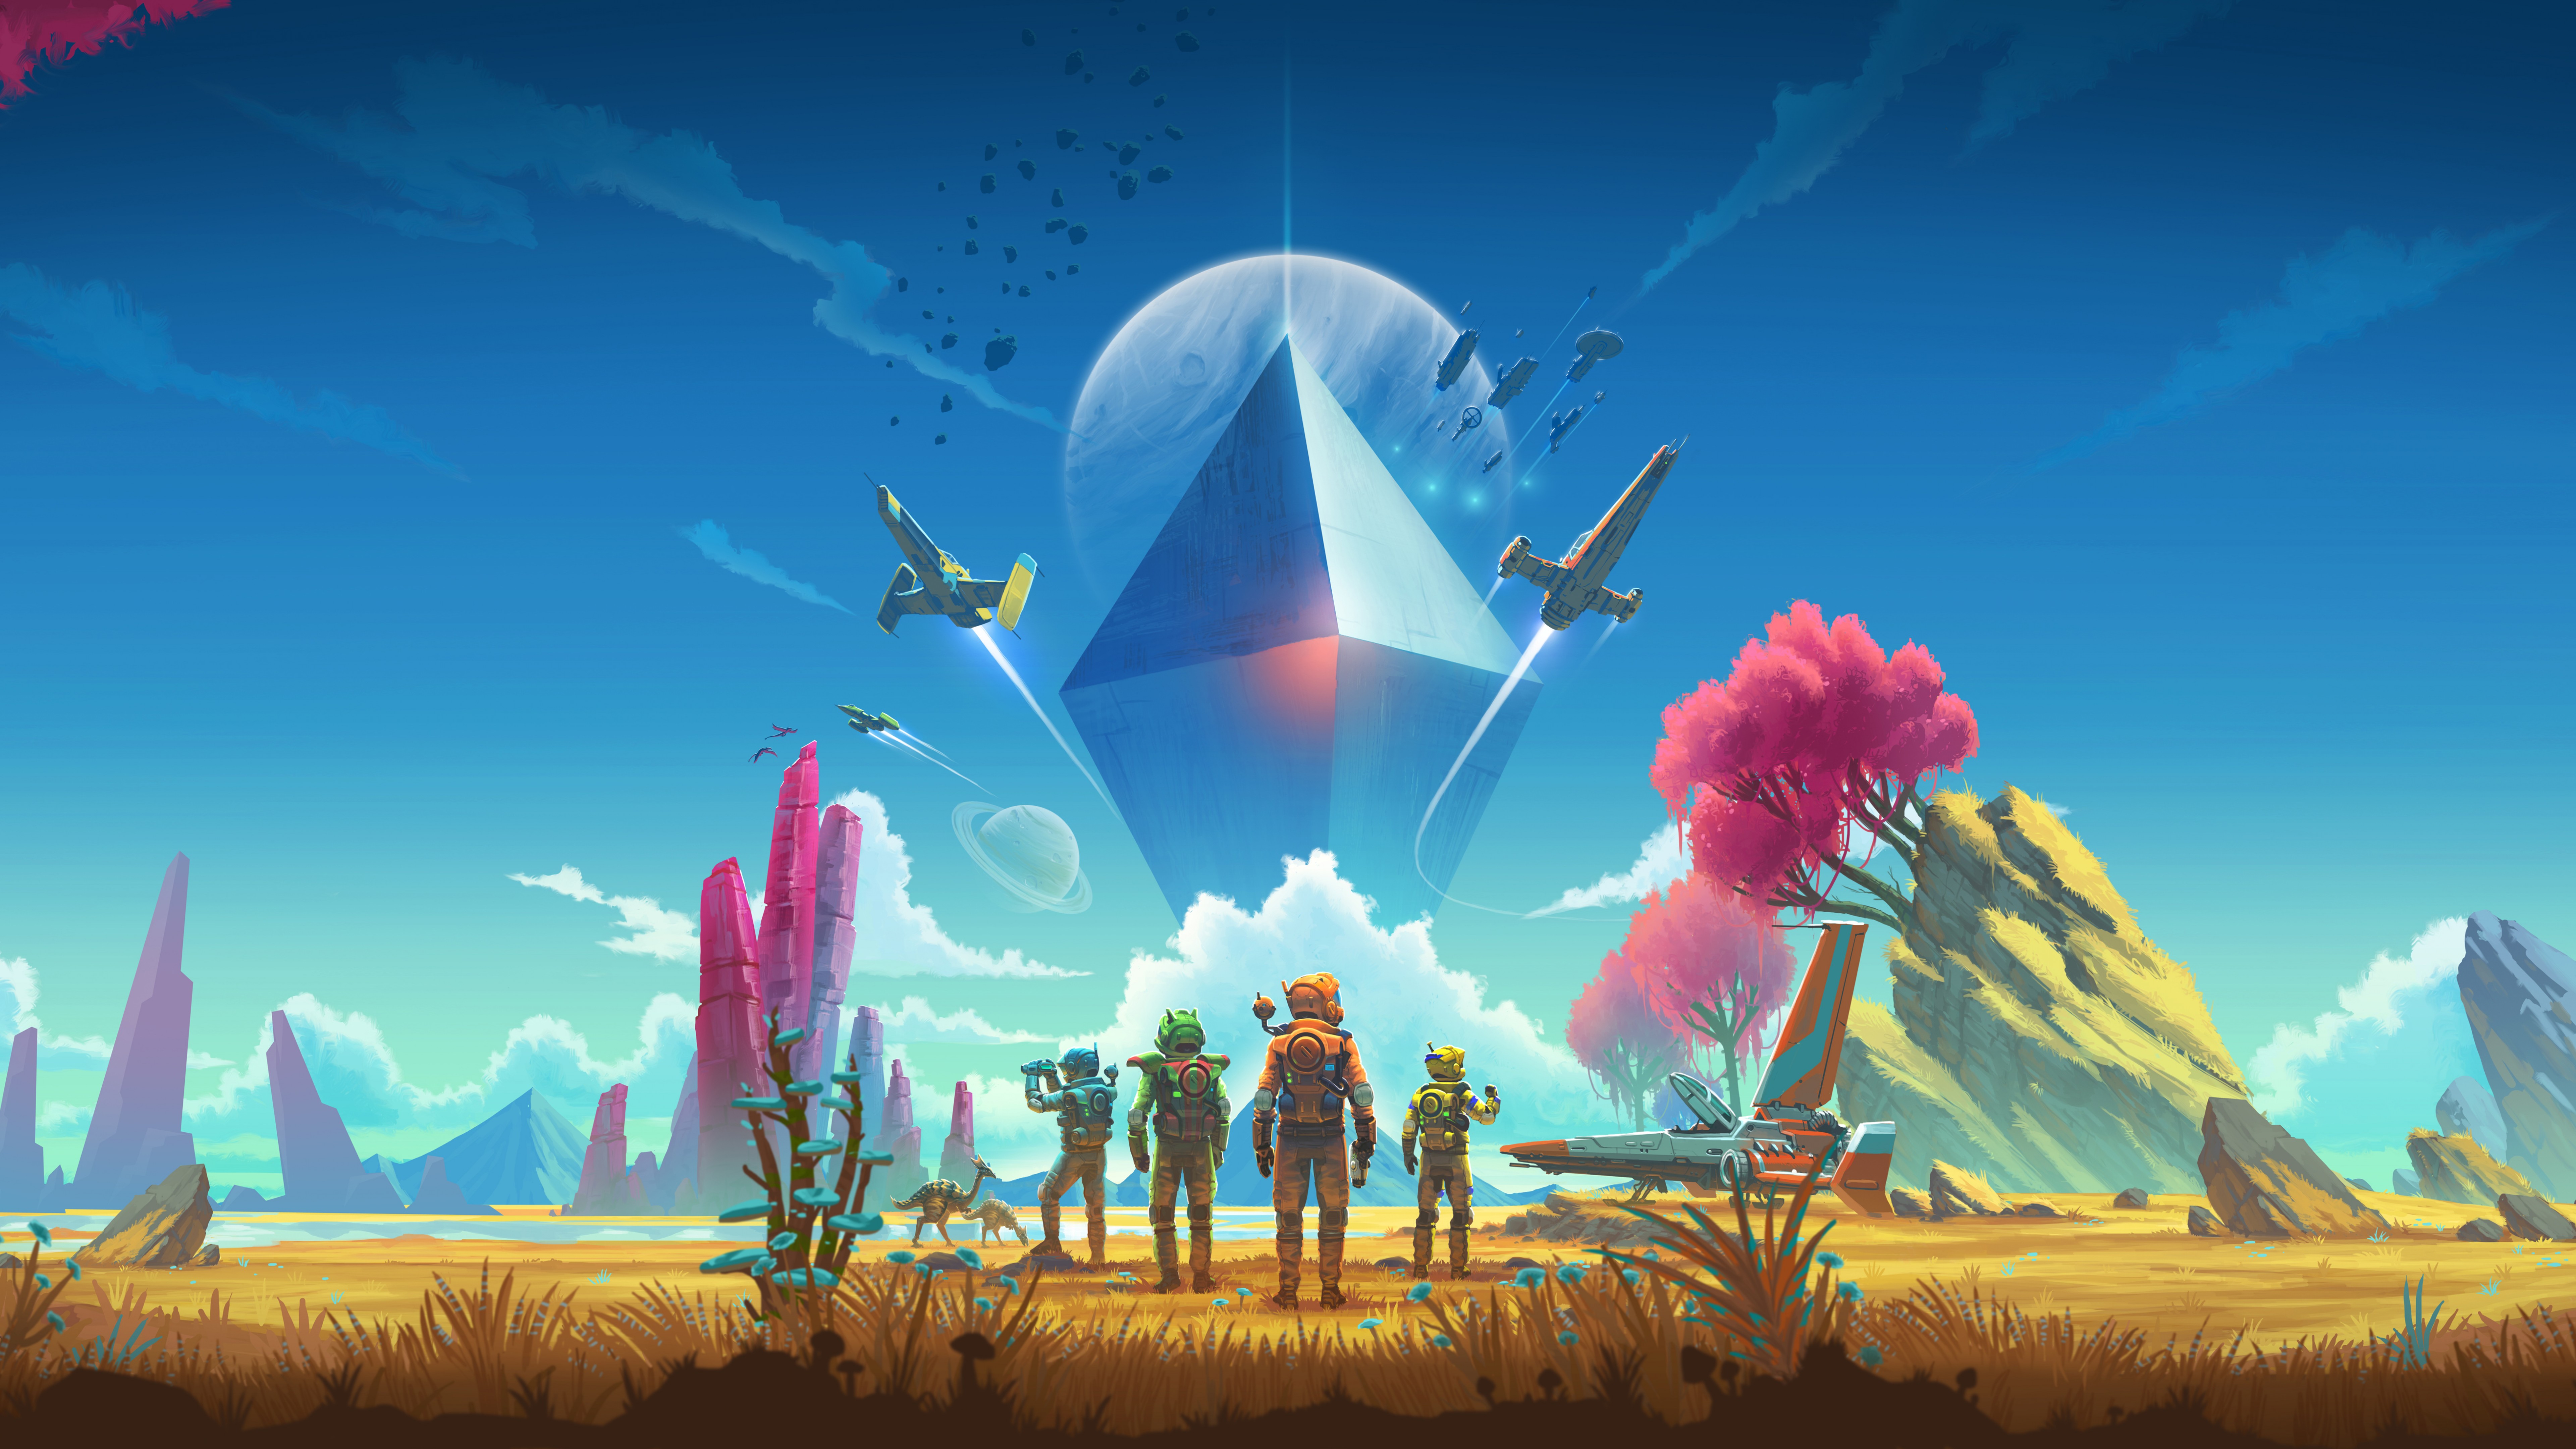 General 7680x4320 No Man's Sky centered rear view aircraft geometric figures spacesuit airplane planet